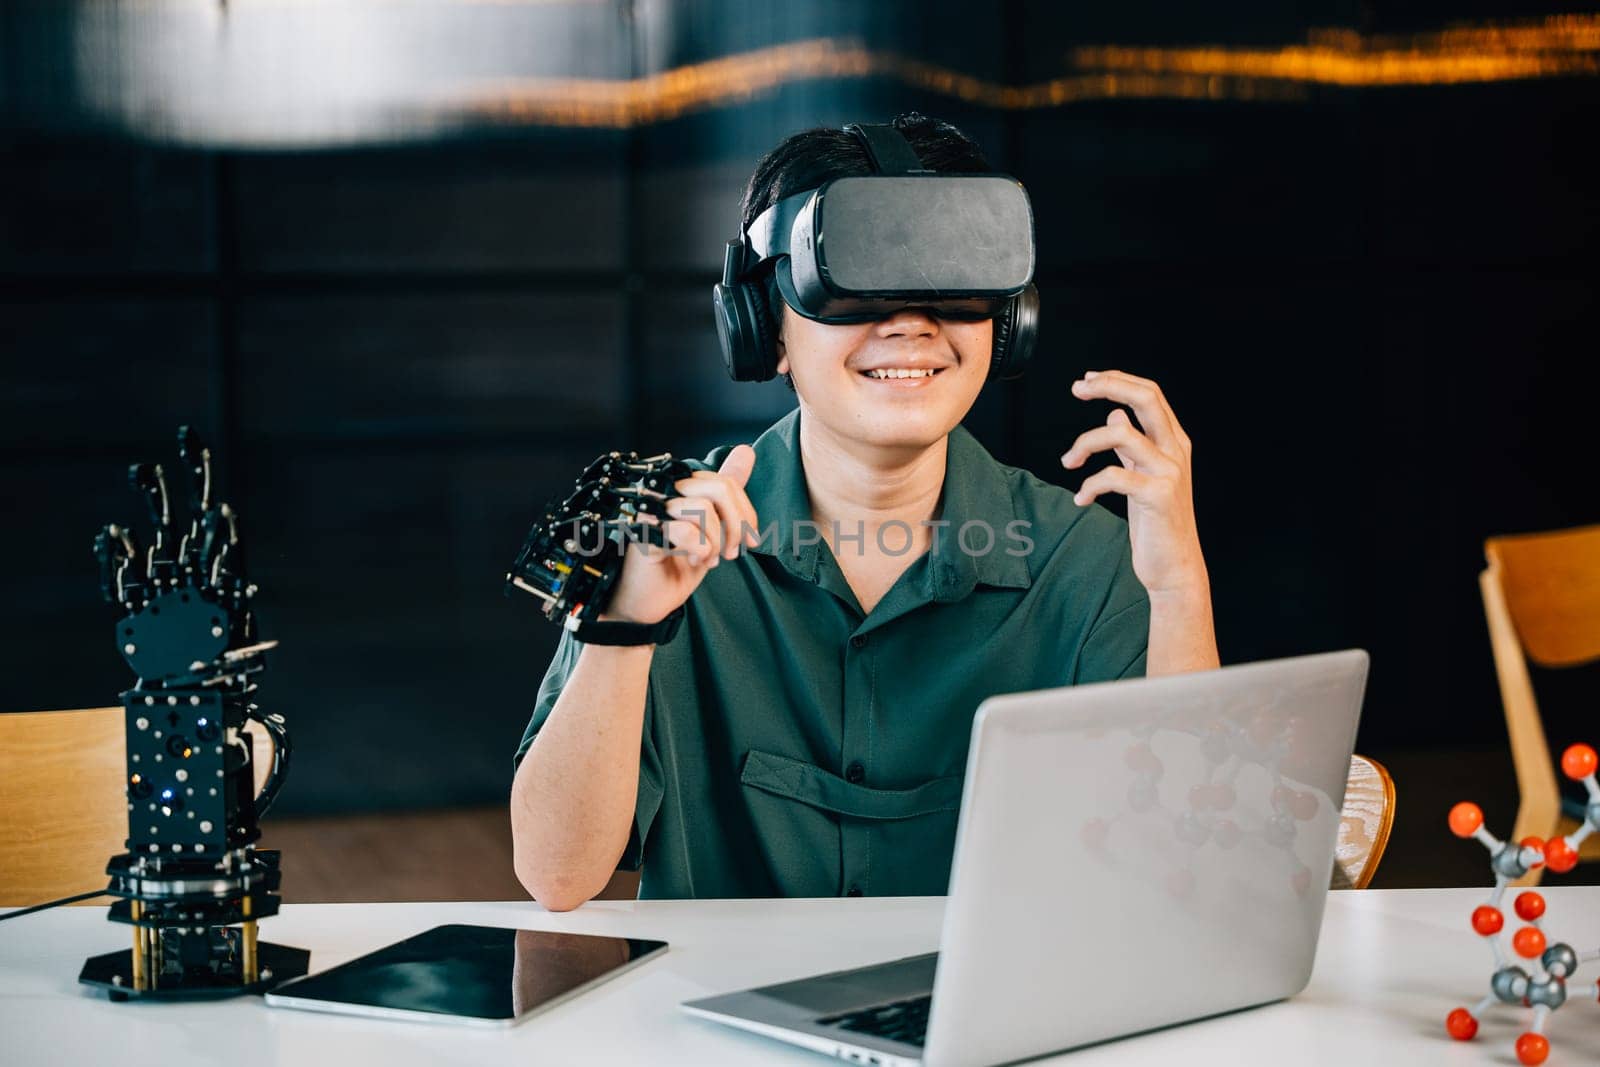 In a classroom teenager wears VR glasses while experimenting with a robot arm project. Integrating robotics programming into STEM education exploring futuristic technology. moves a robotic hand